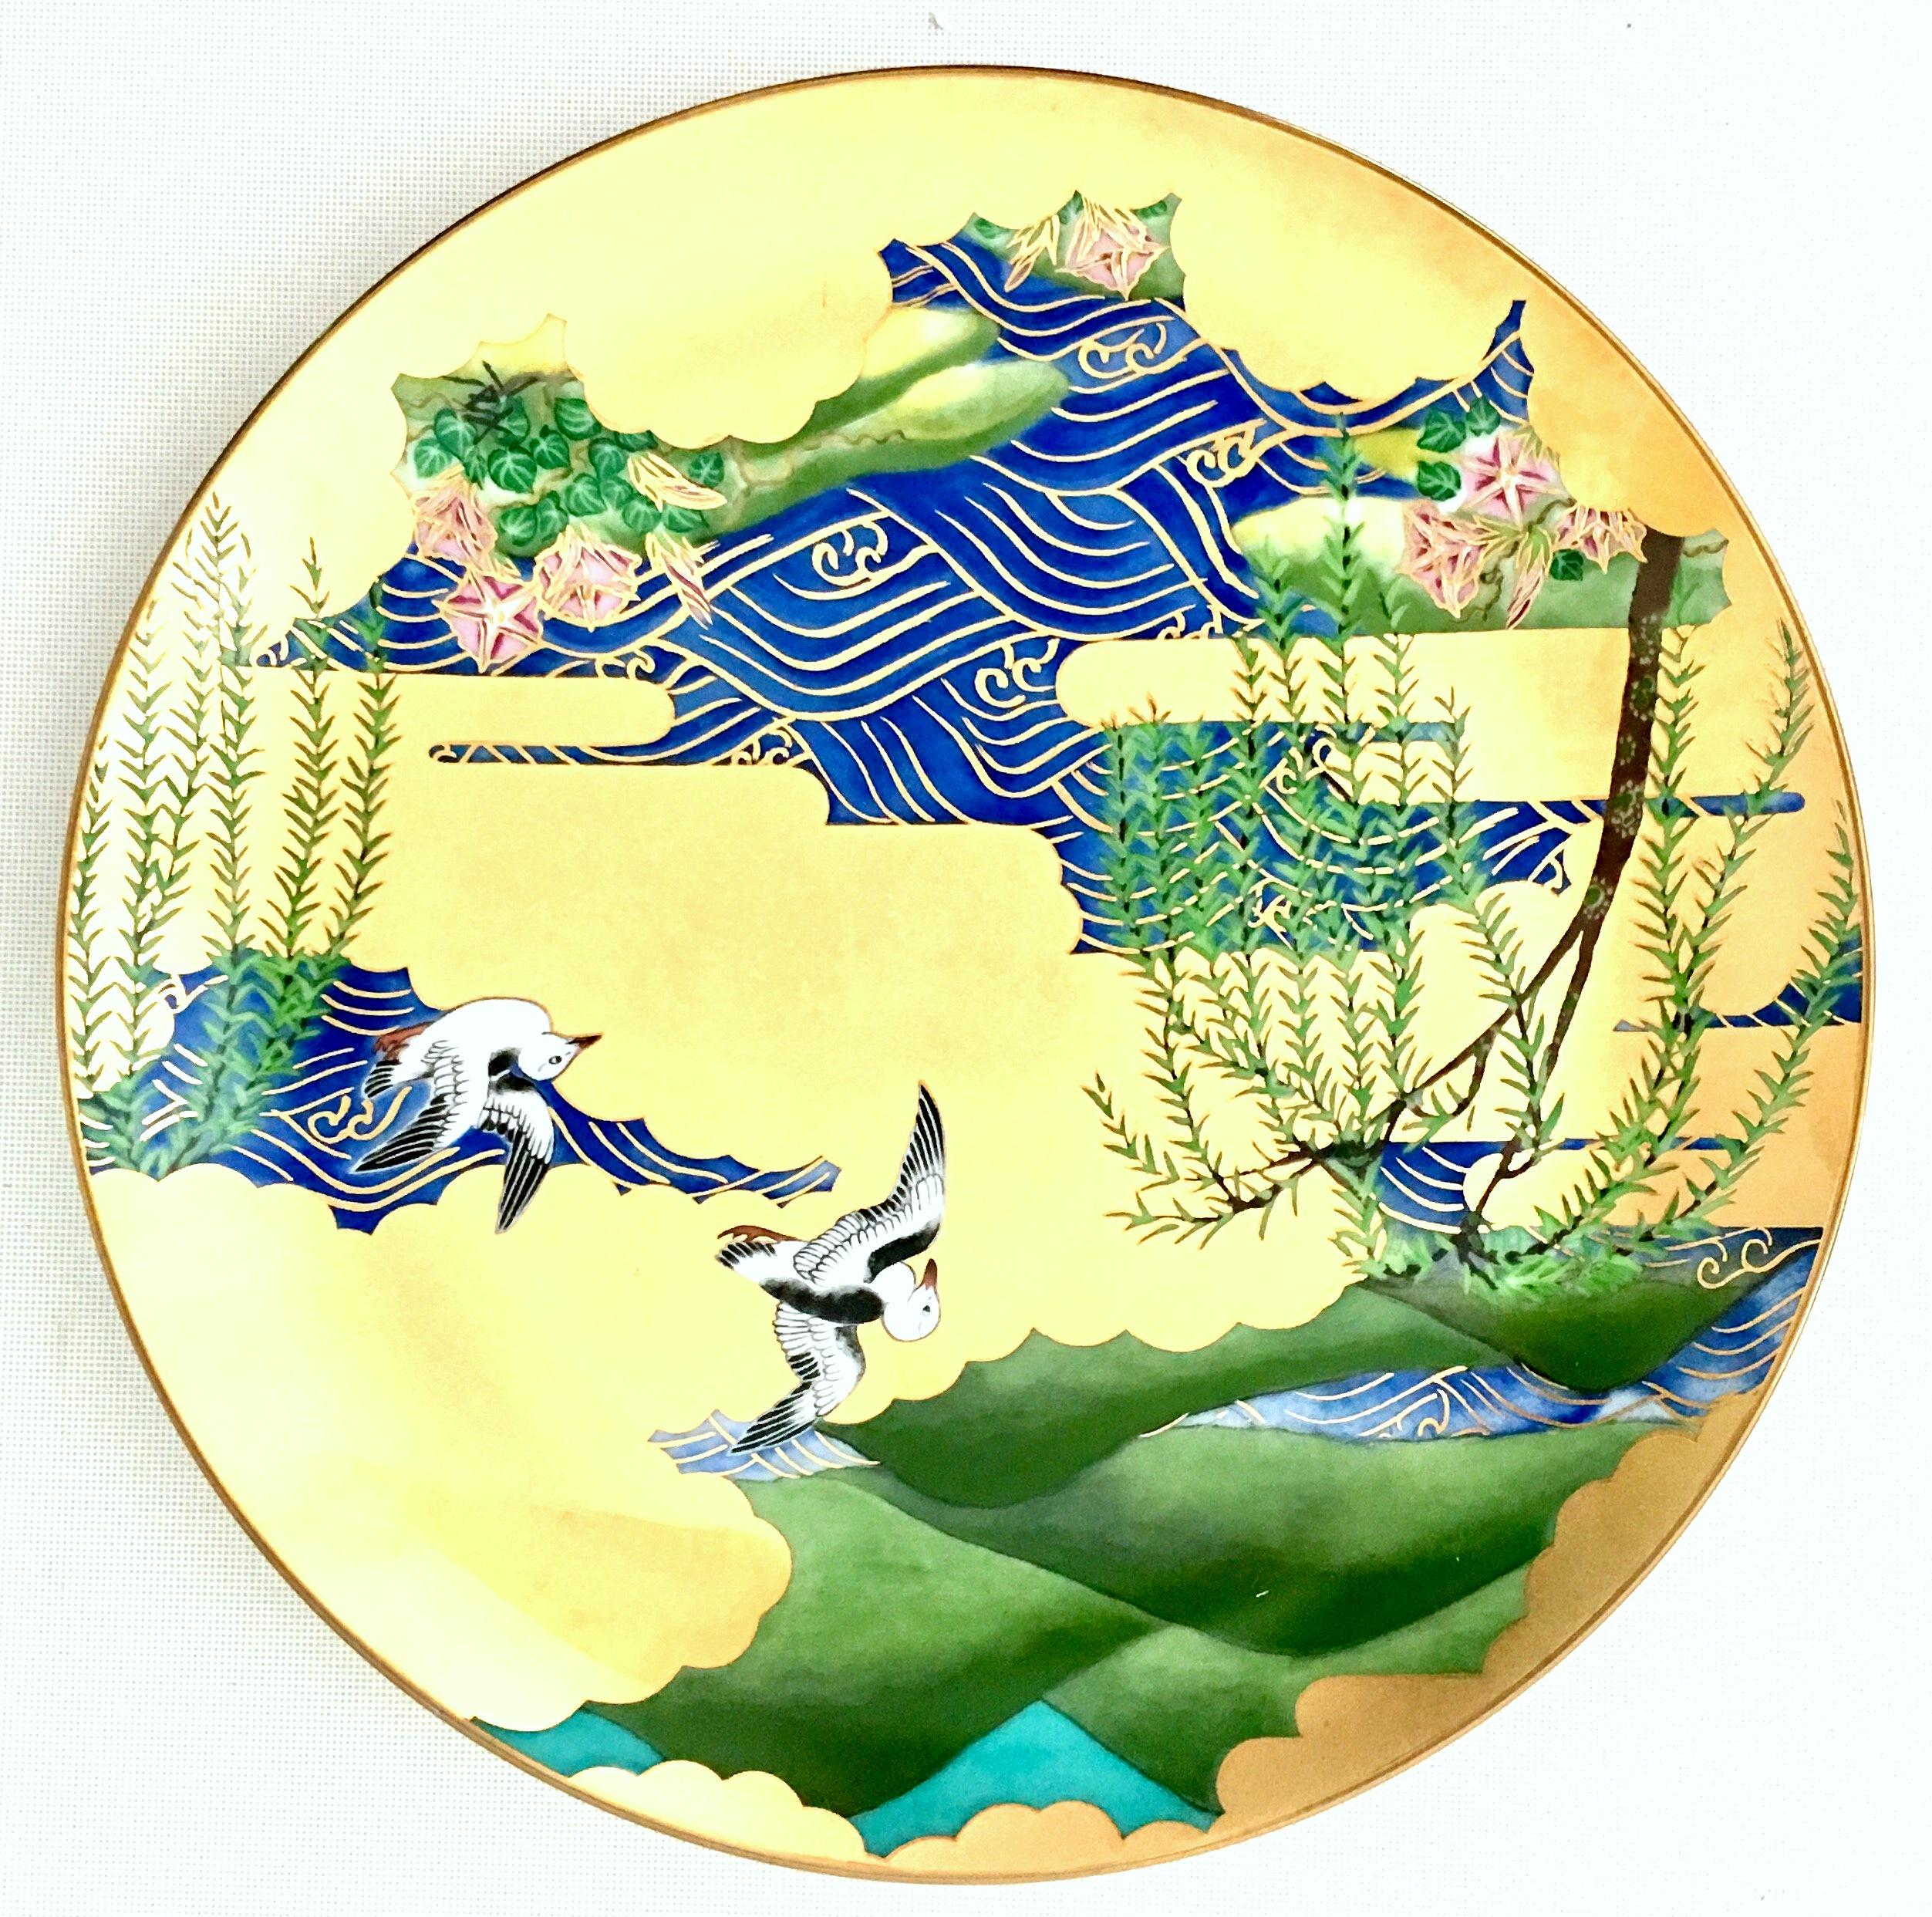 1986 Japanese Limited Edition Hand-Painted Porcelain Plates Set Of 4 In Good Condition For Sale In West Palm Beach, FL